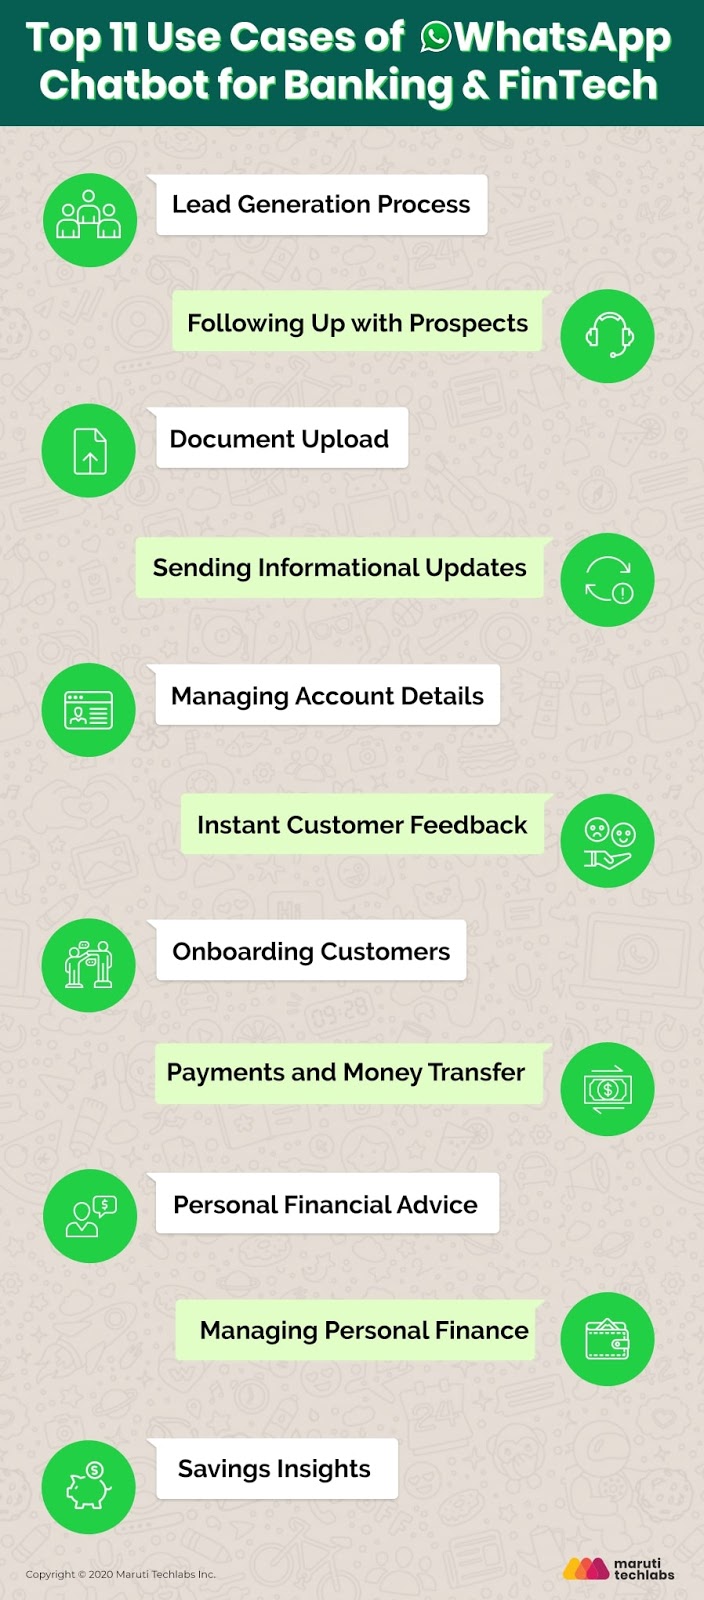 TOP 11 USE CASES – WHATSAPP CHATBOT FOR BANKING & FINTECH